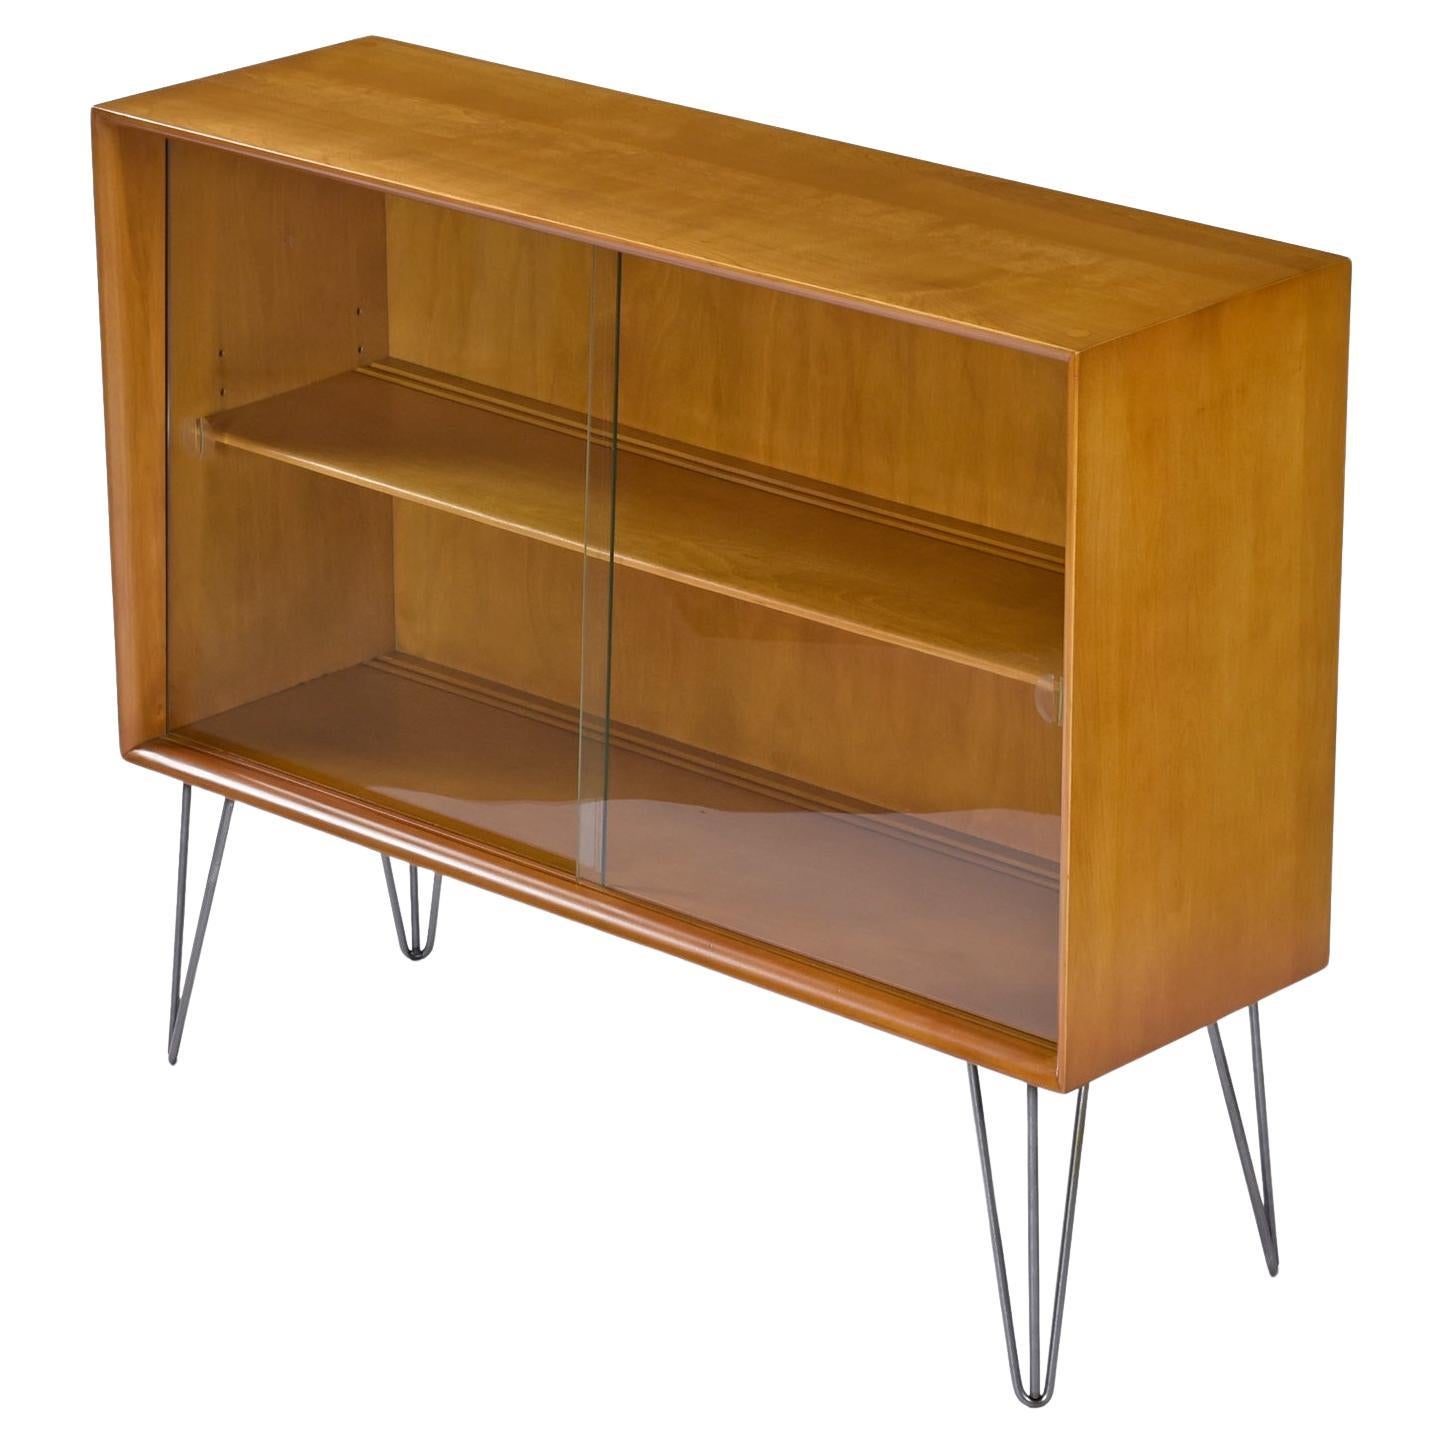 Heywood Wakefield Wheat Finish Bookcase Media Cabinet Dry Bar on Hairpin Legs For Sale